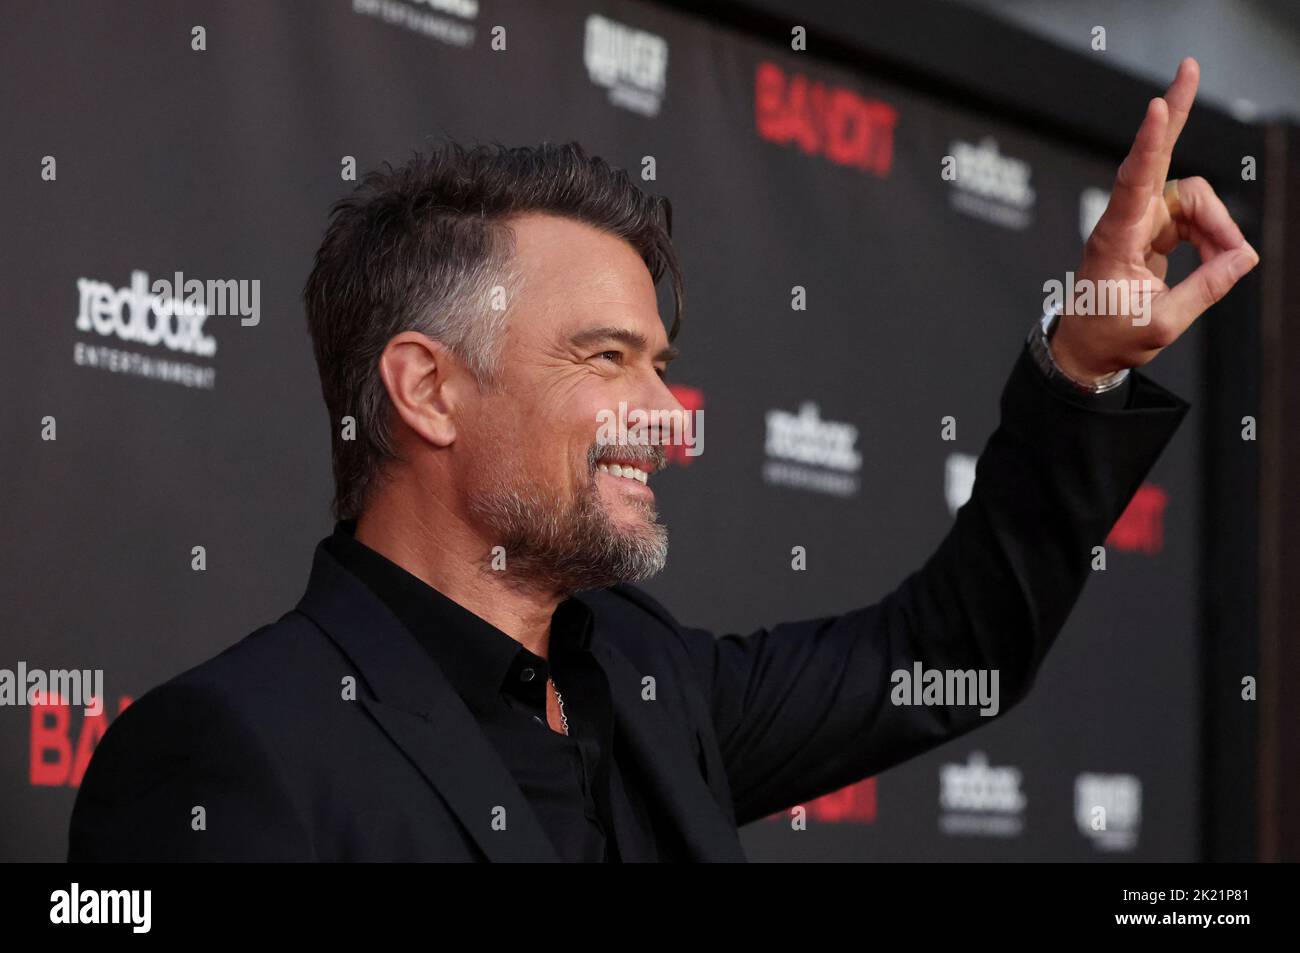 Cast member Josh Duhamel attends a premiere for the film 'Bandit' in Los Angeles, California, U.S. September 21, 2022.  REUTERS/Mario Anzuoni Stock Photo